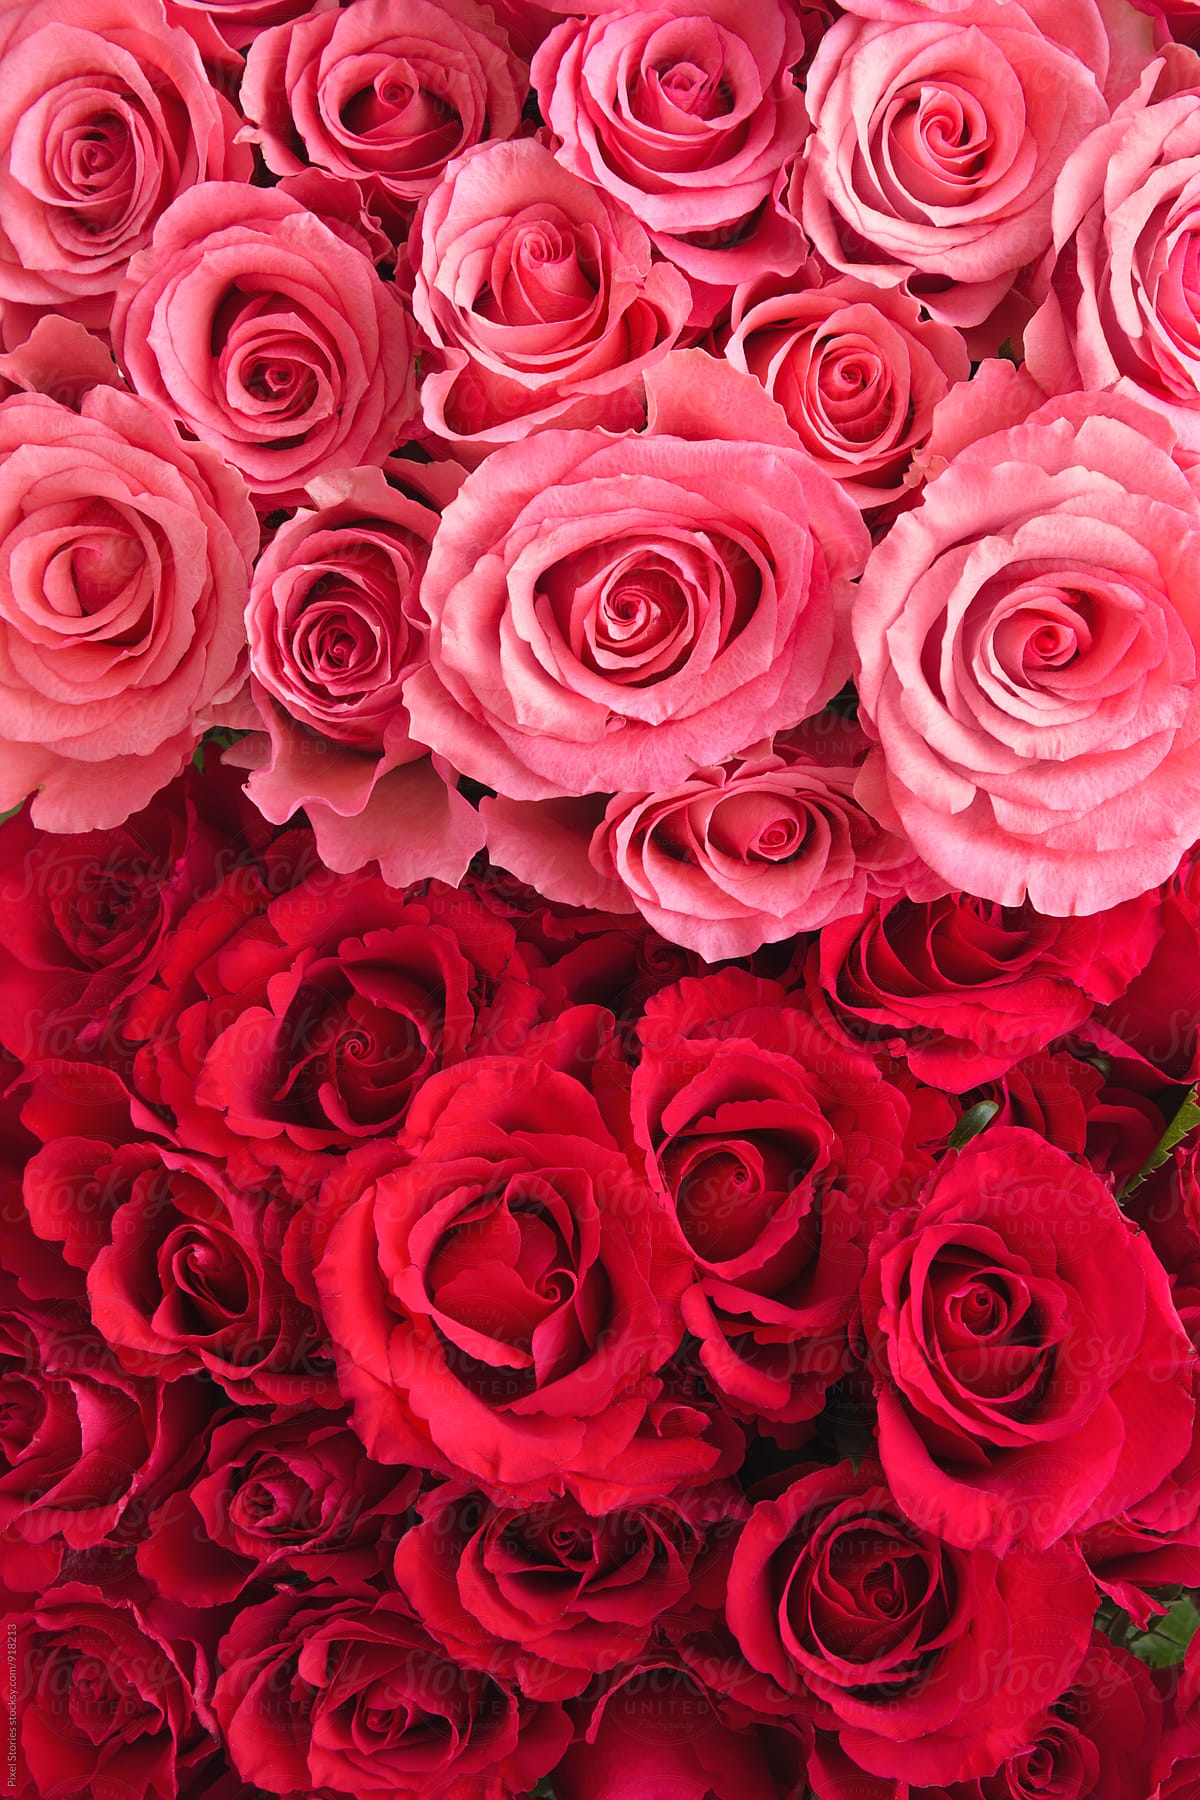 Pink and red roses background by Pixel Stories Rose